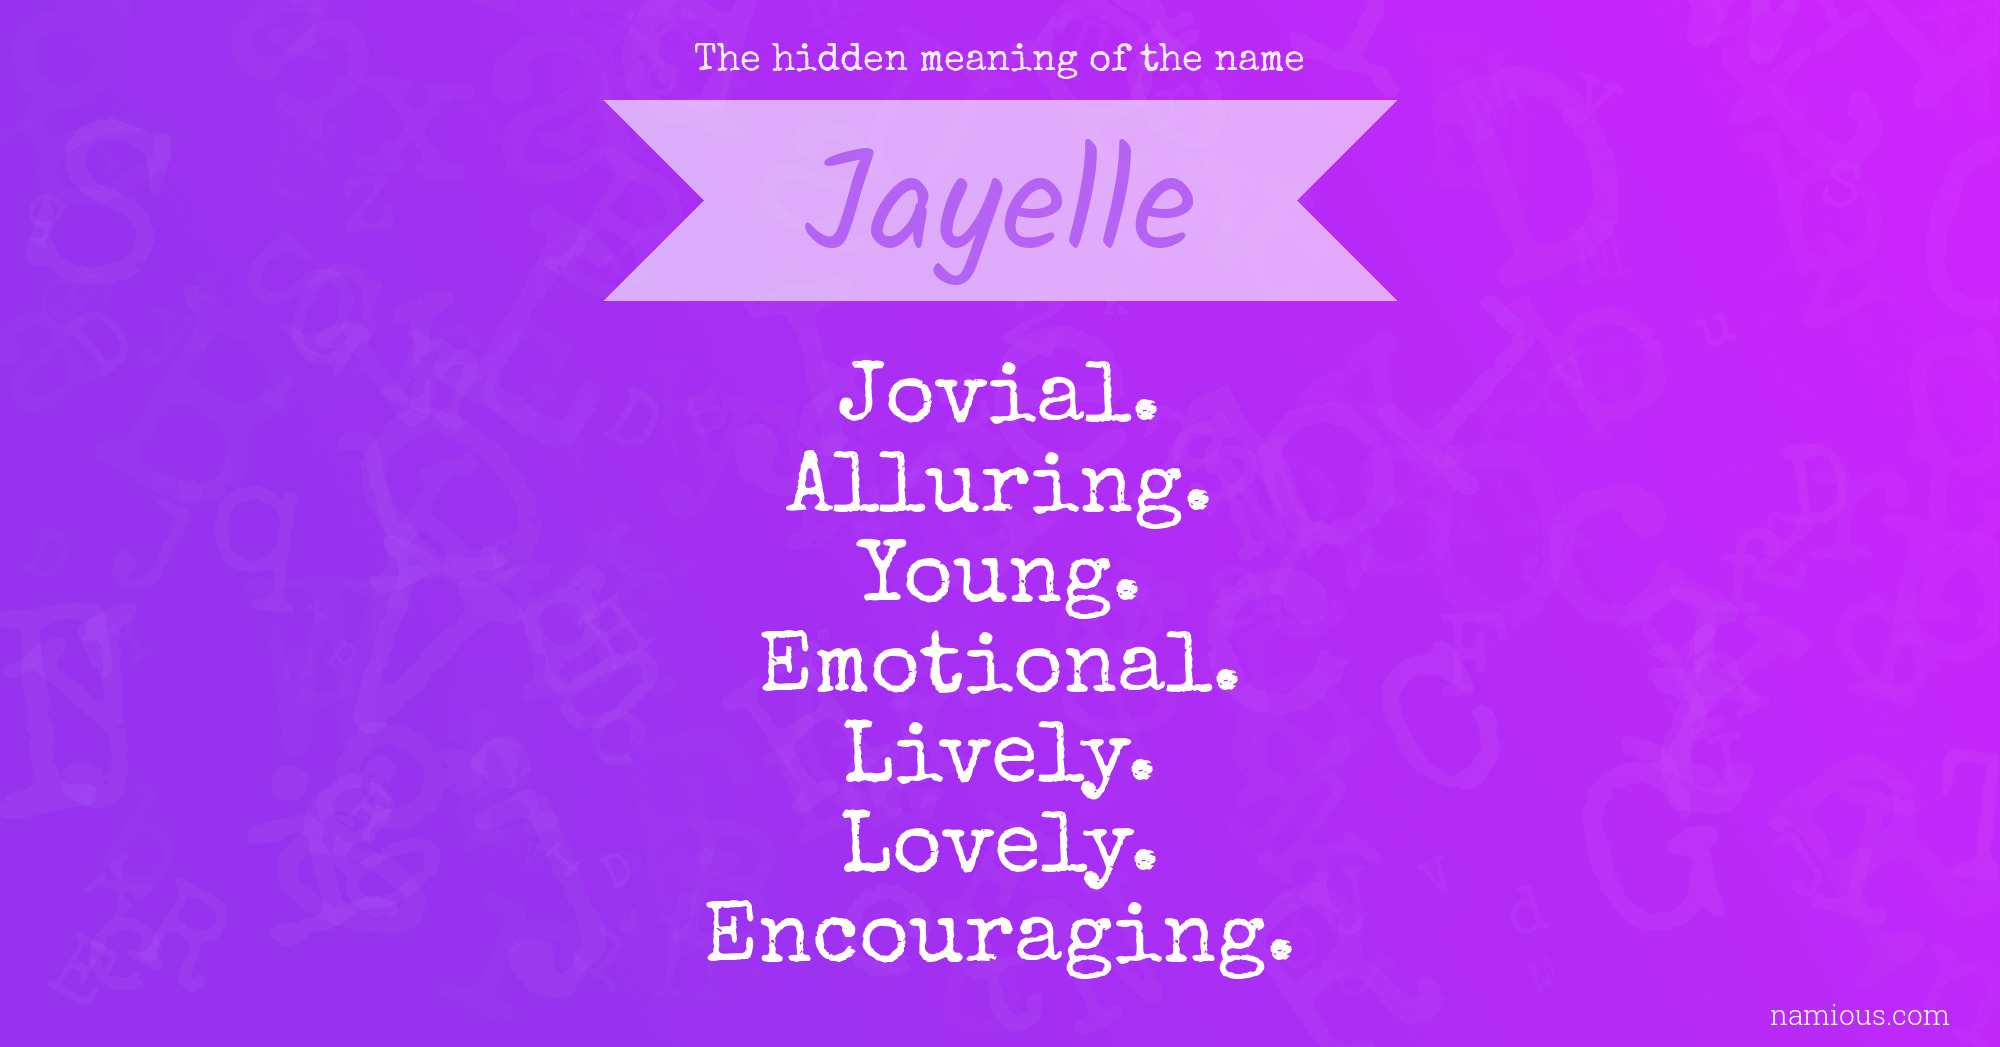 The hidden meaning of the name Jayelle